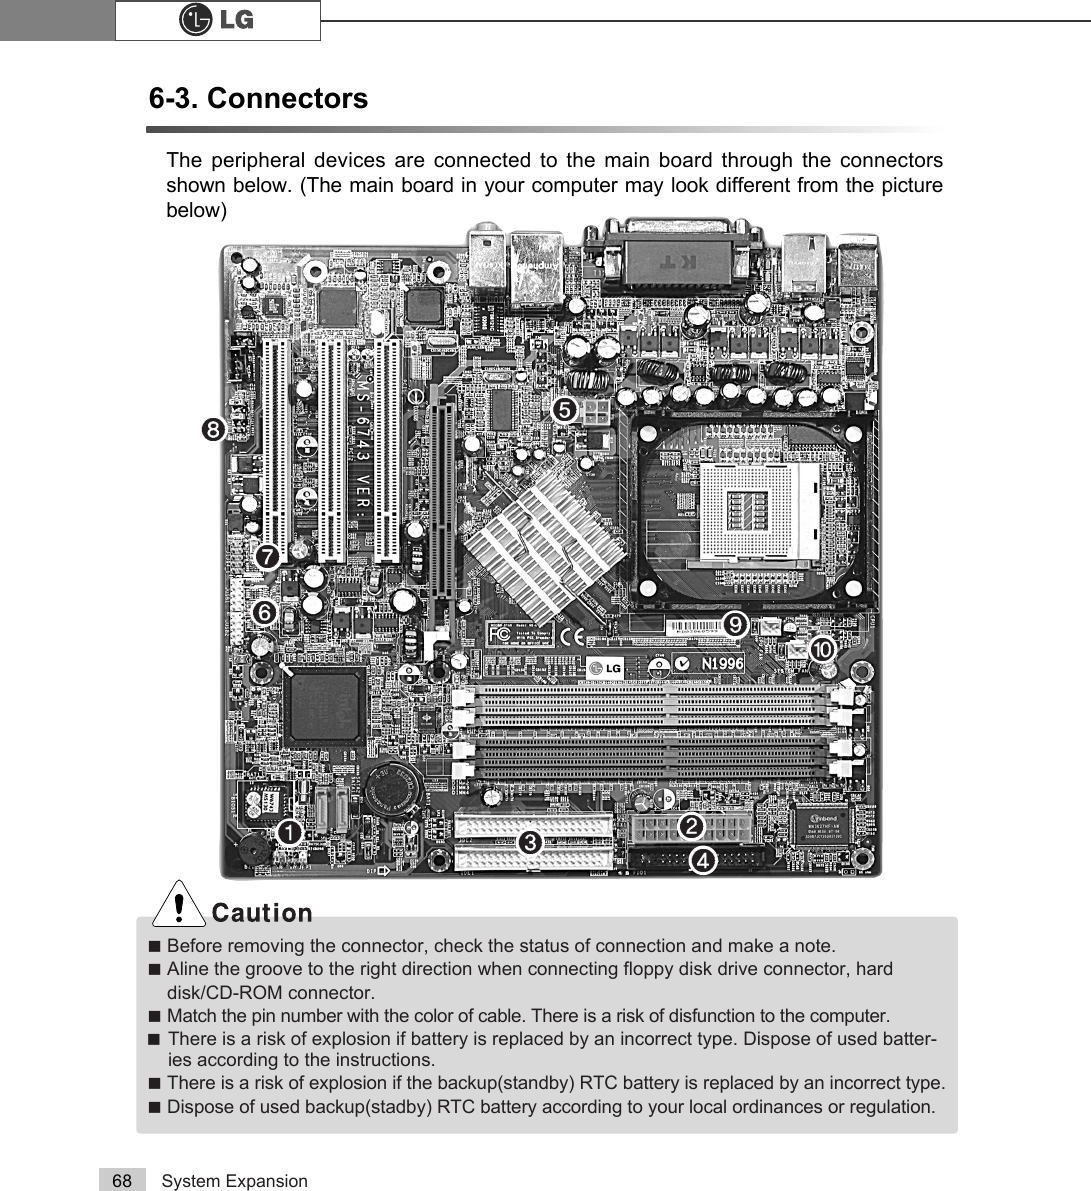 System Expansion686-3. ConnectorsThe peripheral devices are connected to the main board through the connectorsshown below. (The main board in your computer may look different from the picturebelow)ãBefore removing the connector, check the status of connection and make a note.ãAline the groove to the right direction when connecting floppy disk drive connector, hard disk/CD-ROM connector.ãMatch the pin number with the color of cable. There is a risk of disfunction to the computer.ãThere is a risk of explosion if battery is replaced by an incorrect type. Dispose of used batter-ies according to the instructions.ãThere is a risk of explosion if the backup(standby) RTC battery is replaced by an incorrect type.ãDispose of used backup(stadby) RTC battery according to your local ordinances or regulation.℘ℙℚℛ℠℡ℜ℞ℝ℟